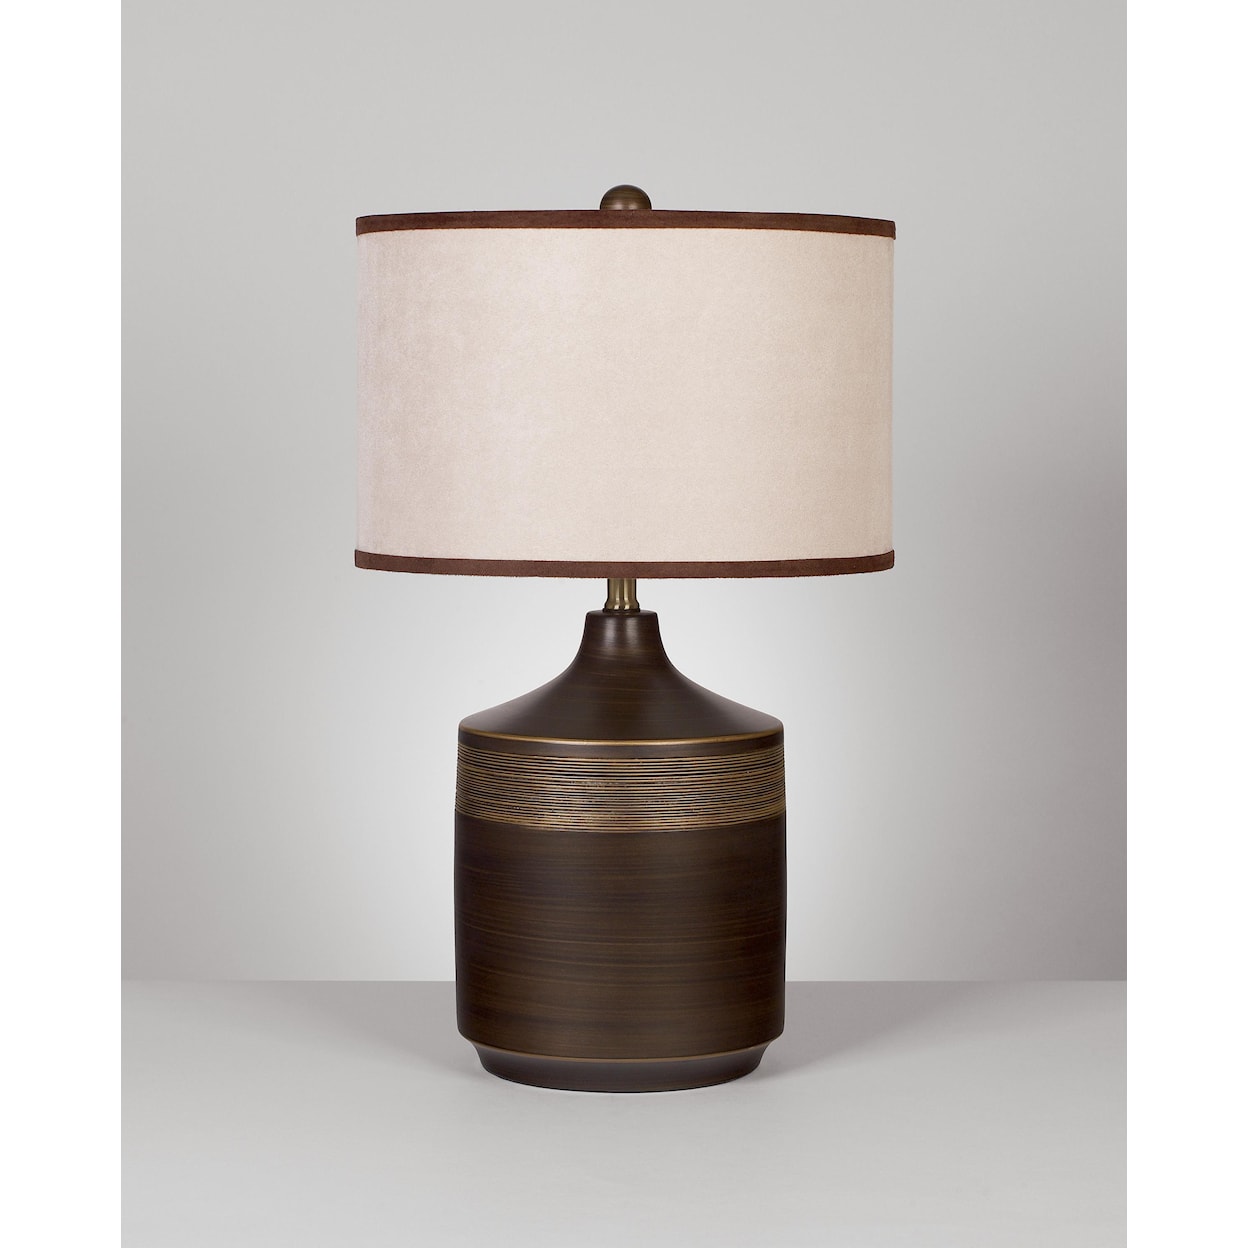 Signature Design by Ashley Lamps - Contemporary Set of 2 Karissa Table Lamps